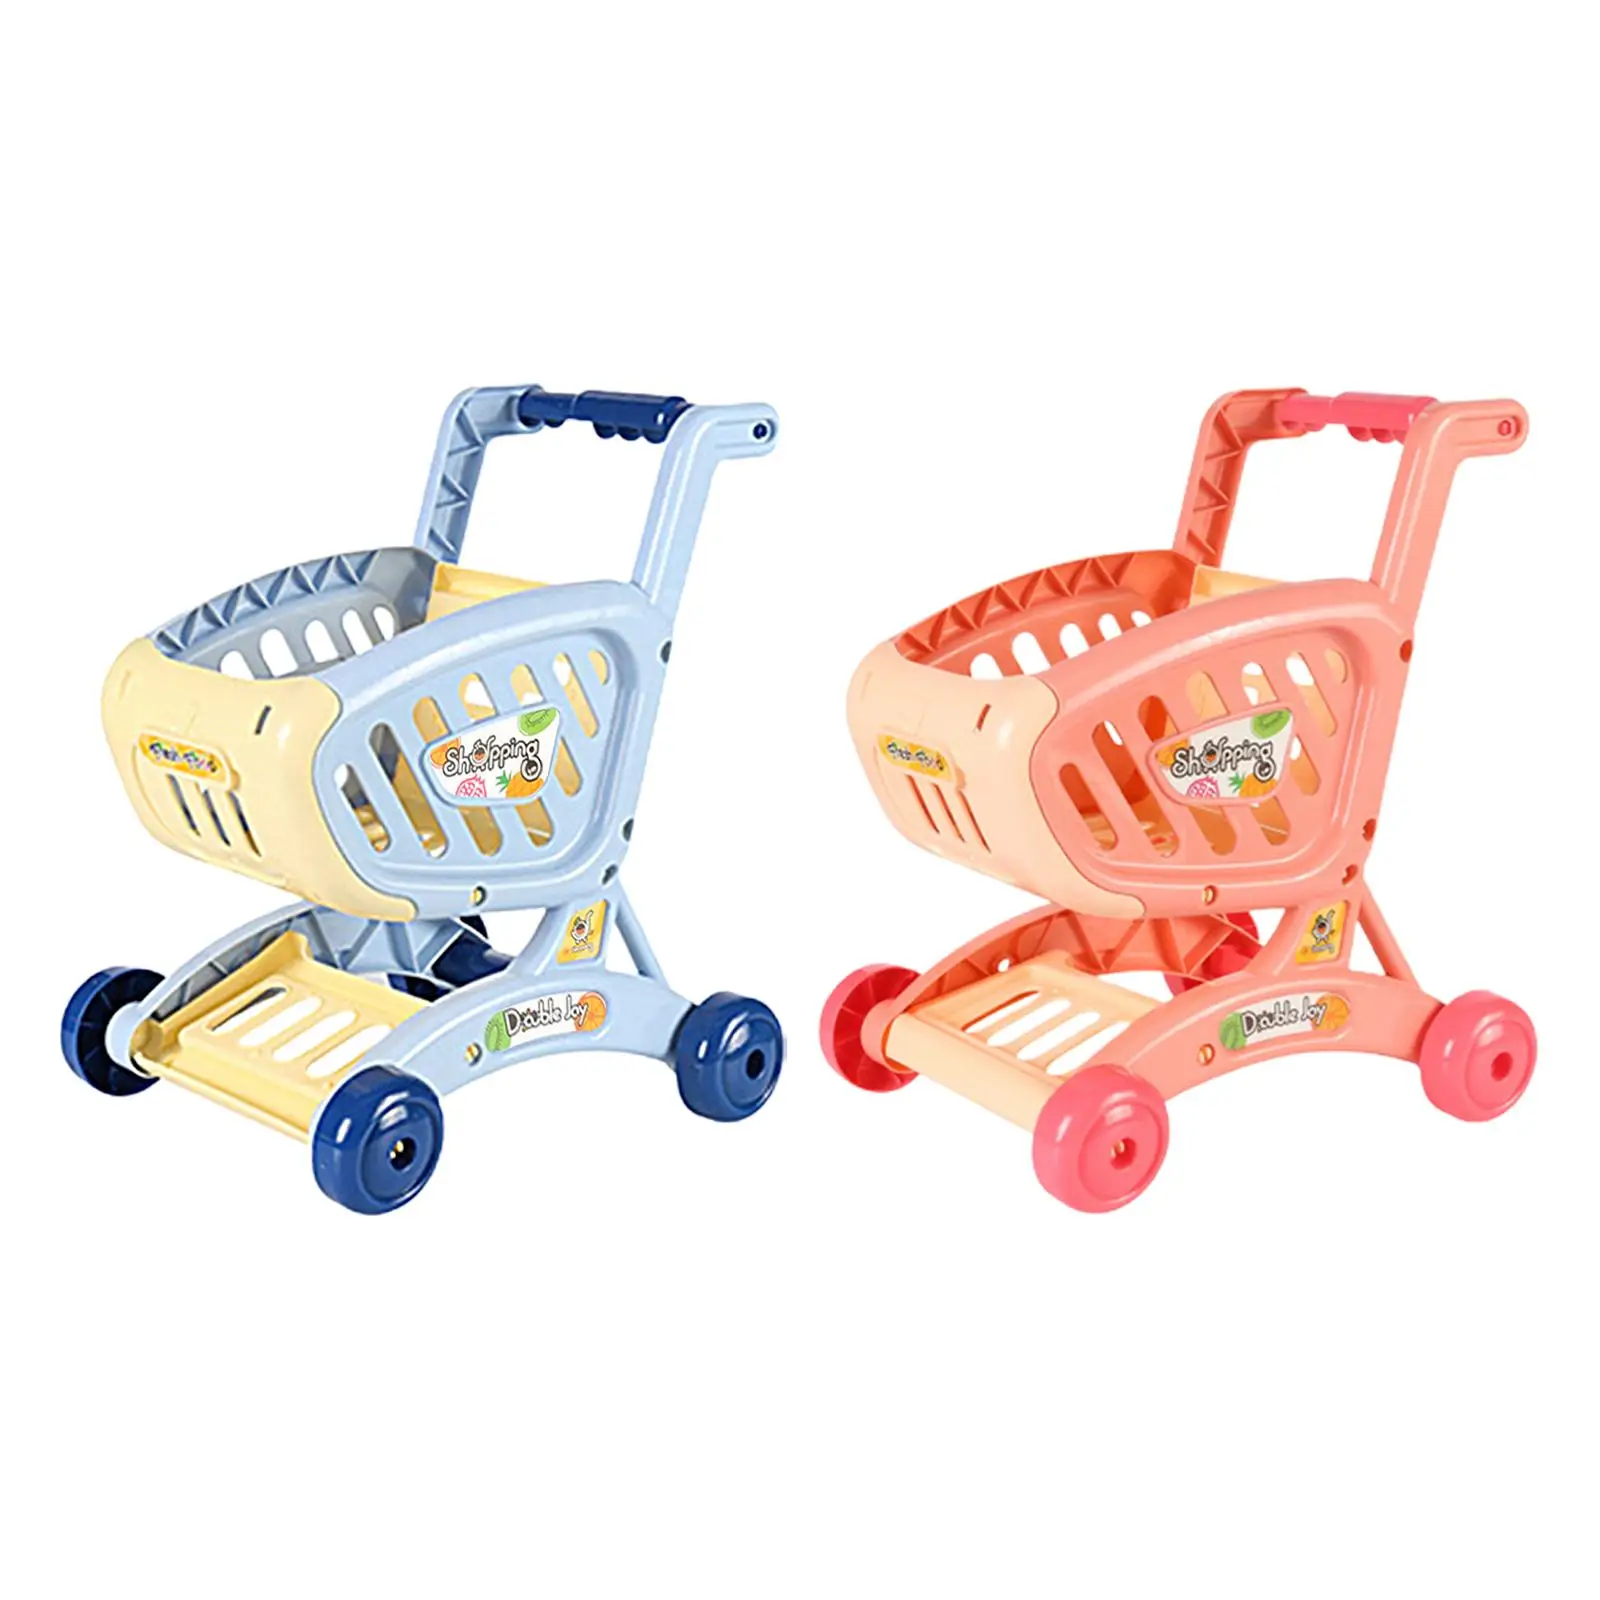 

Shopping Cart Early Educational Toys Easy to Push Supermarket Trolley for Girls and Boys Baby Toddlers Ages 3 and up Kids